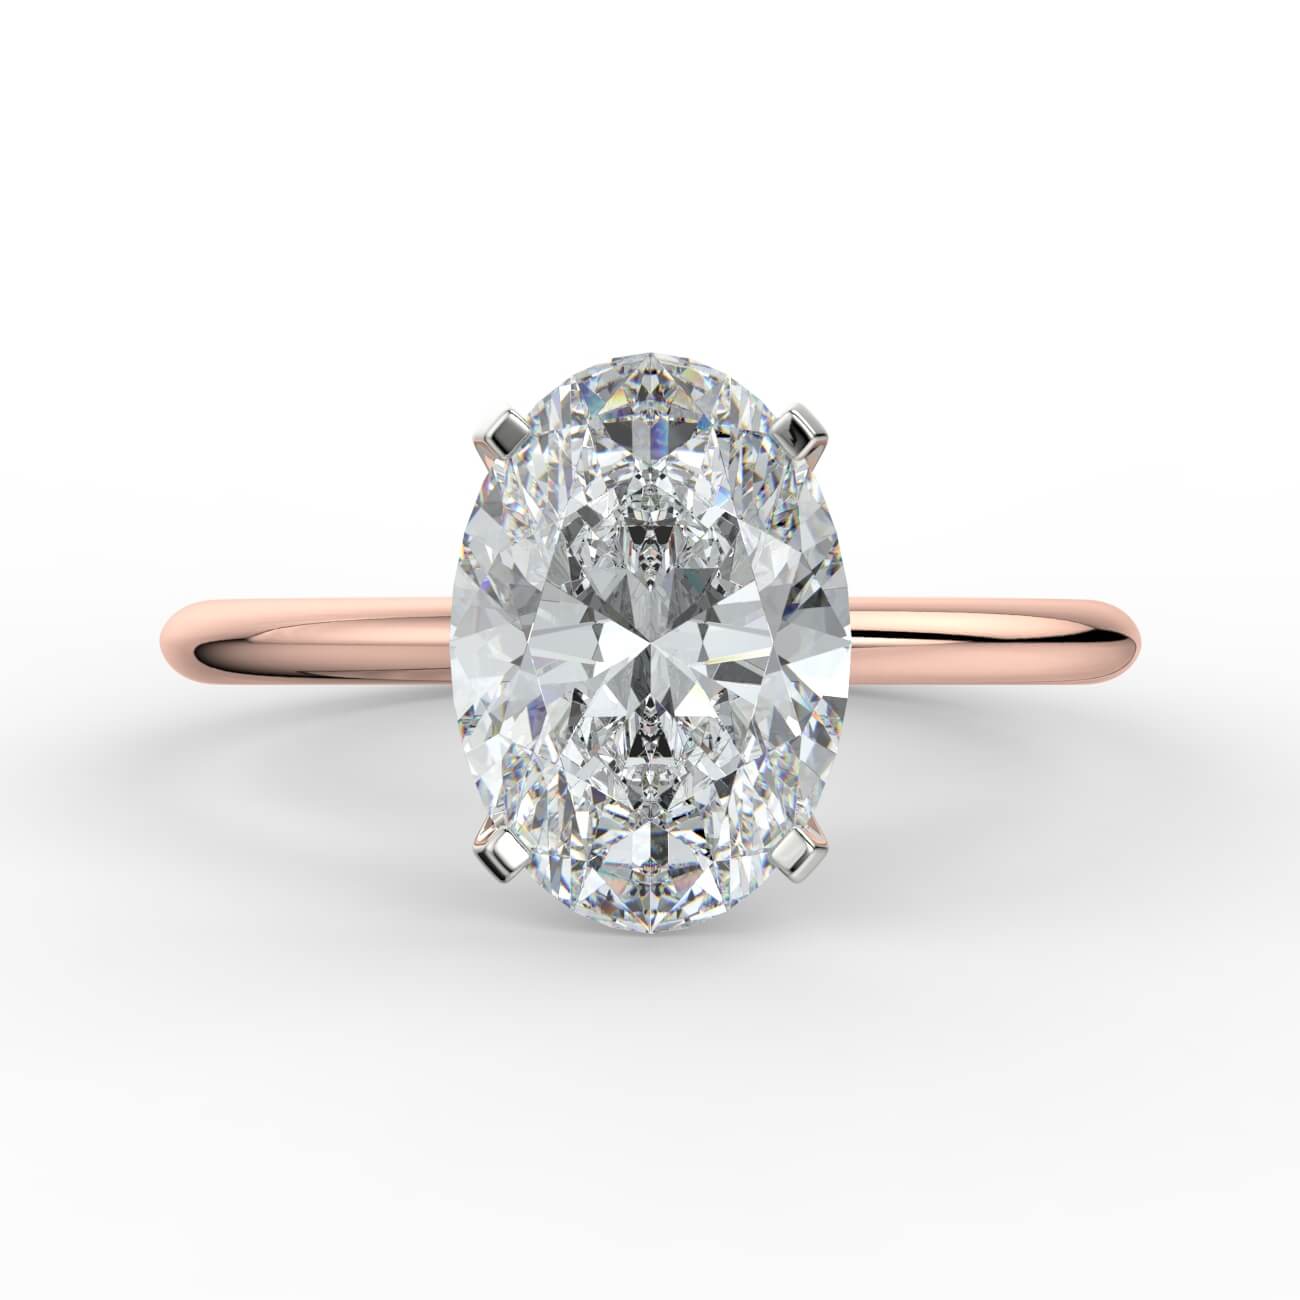 Tapering Solitaire Engagement Ring in rose and white gold – Australian Diamond Network